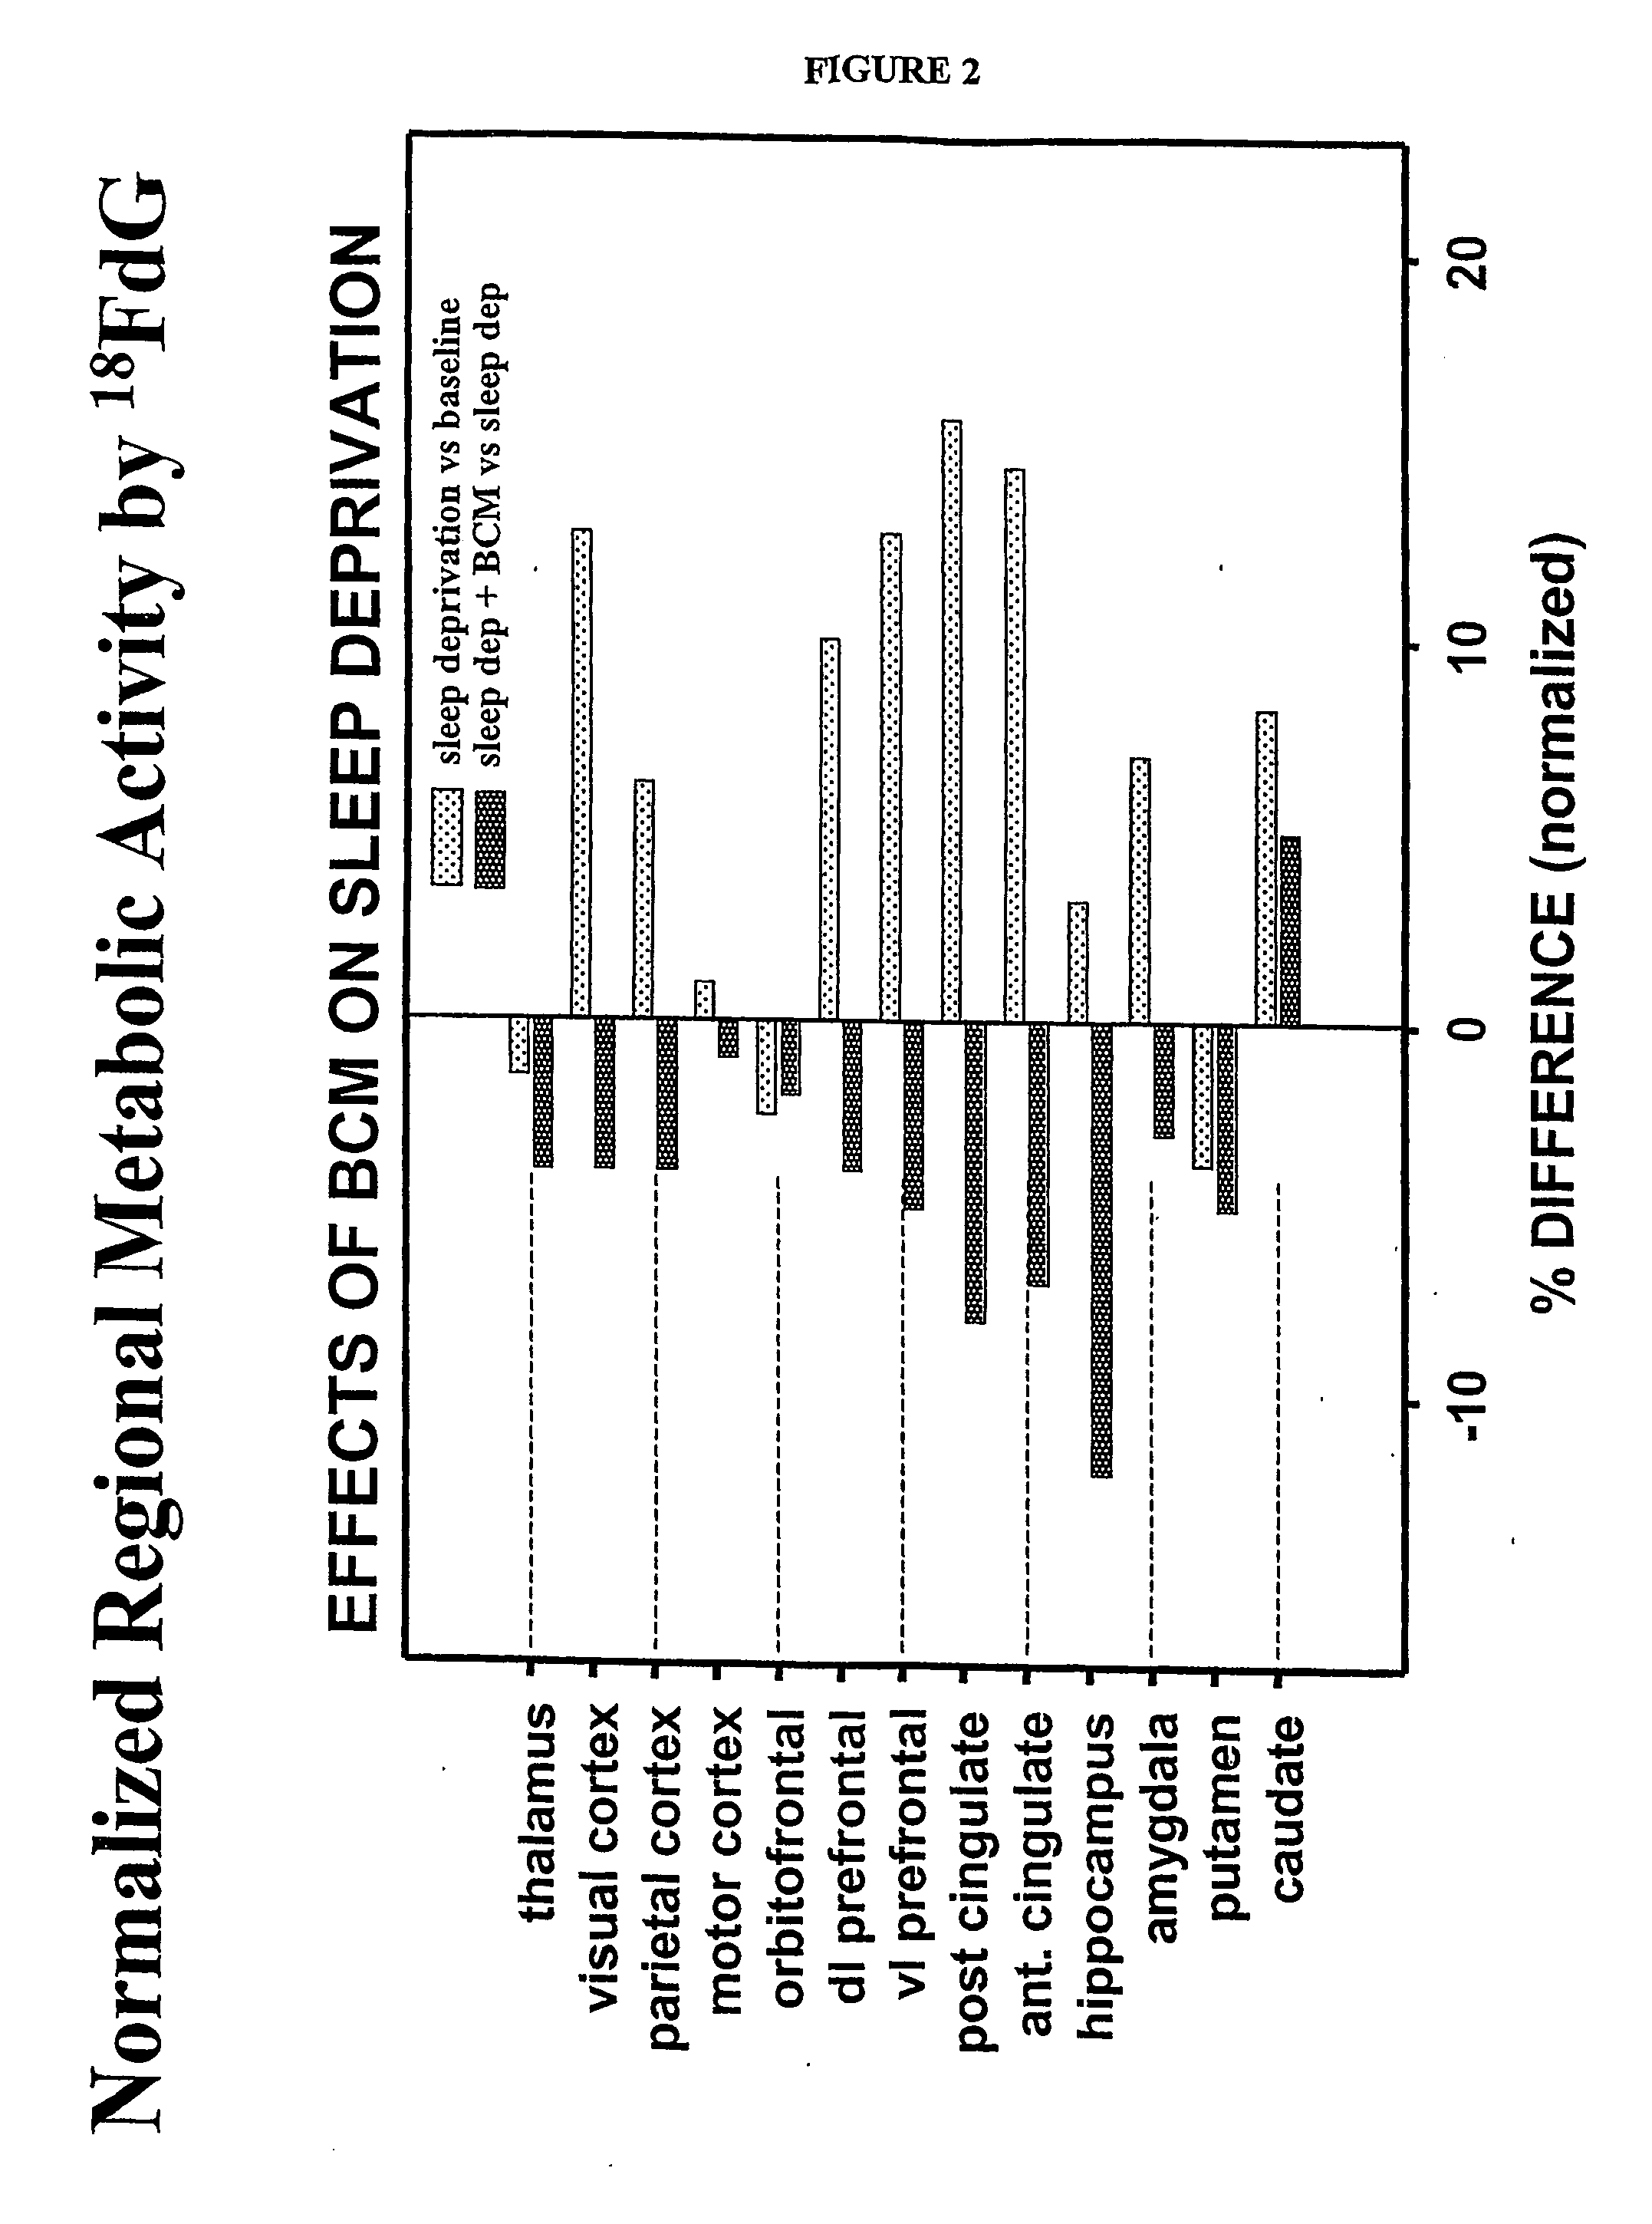 Method of treating cognitive decline due to sleep deprivation and stress